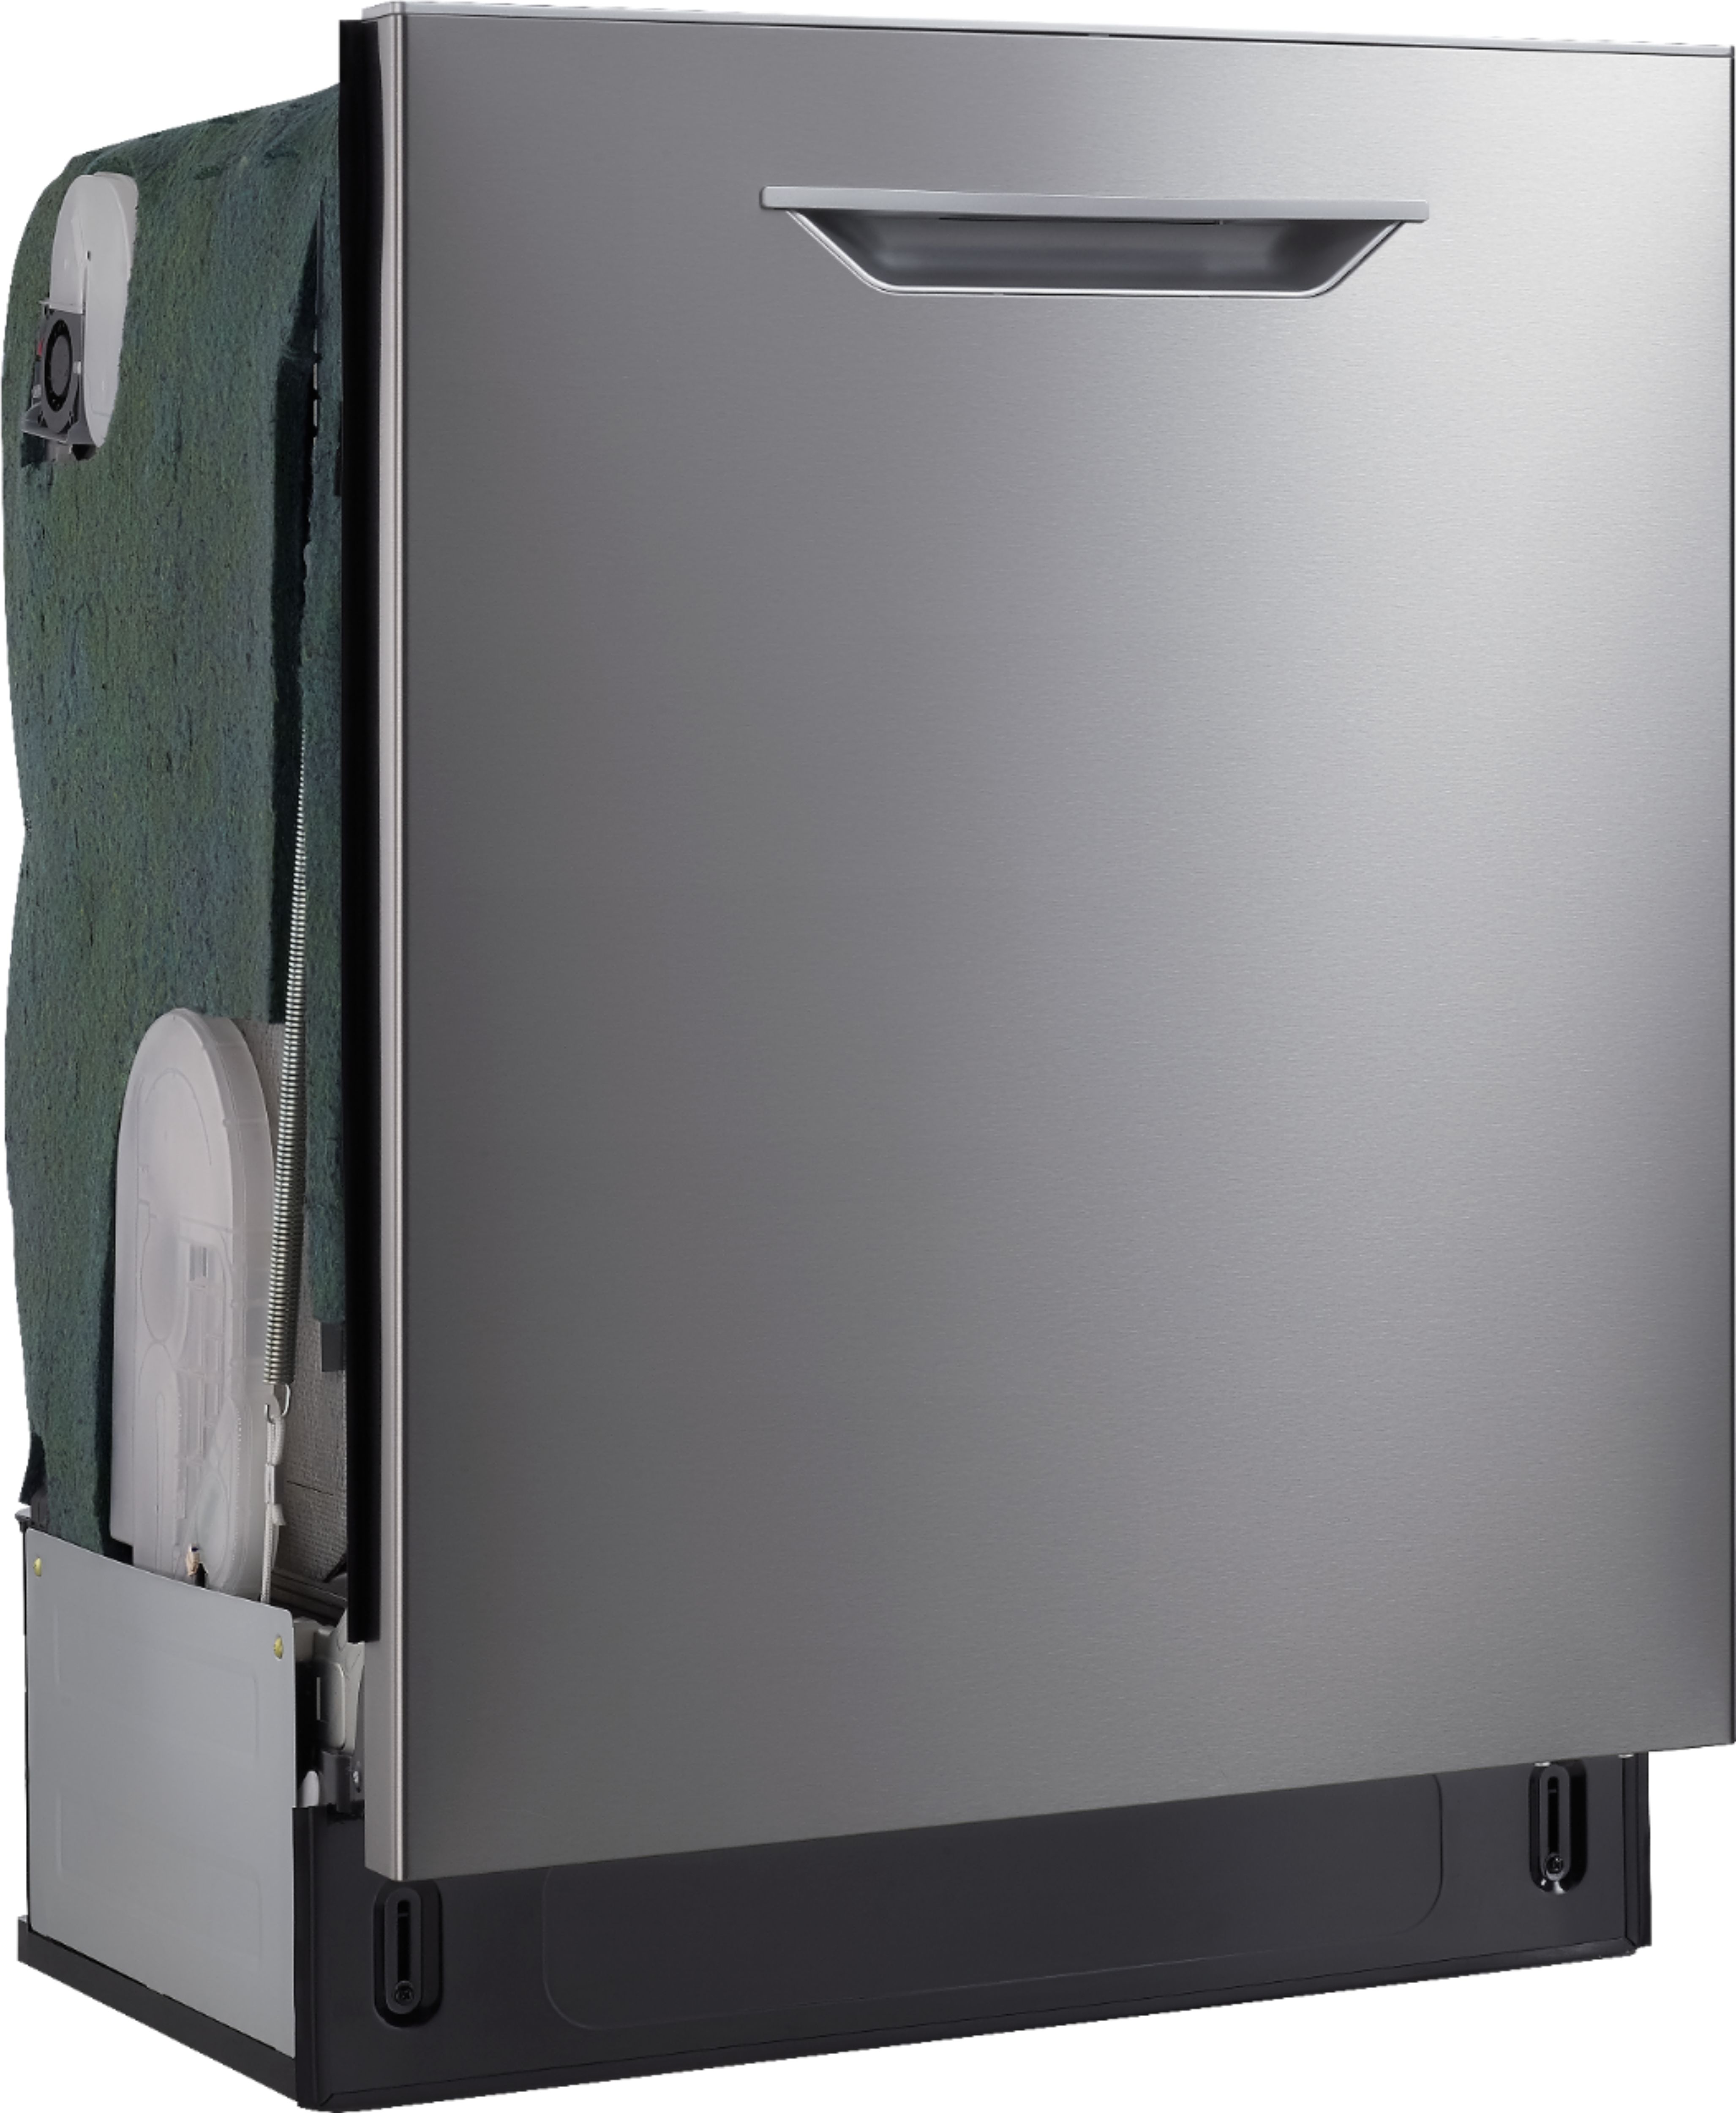 Angle View: Insignia™ - 24" Top Control Built-In Dishwasher - Stainless steel